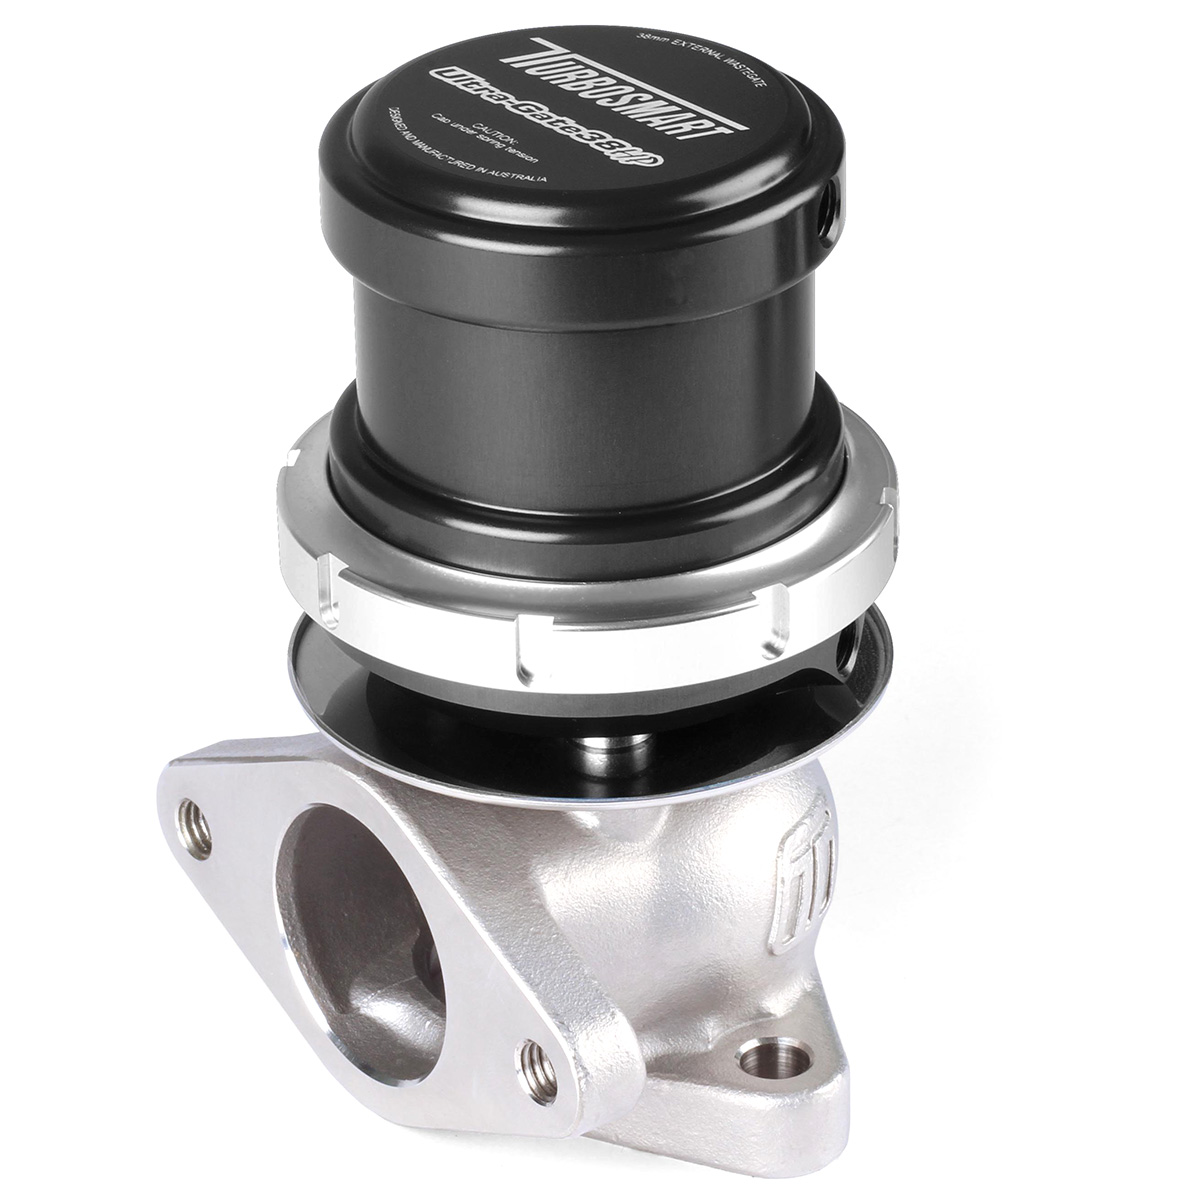 Wastegate Flange Ultra gate 38 1/2 thick threaded